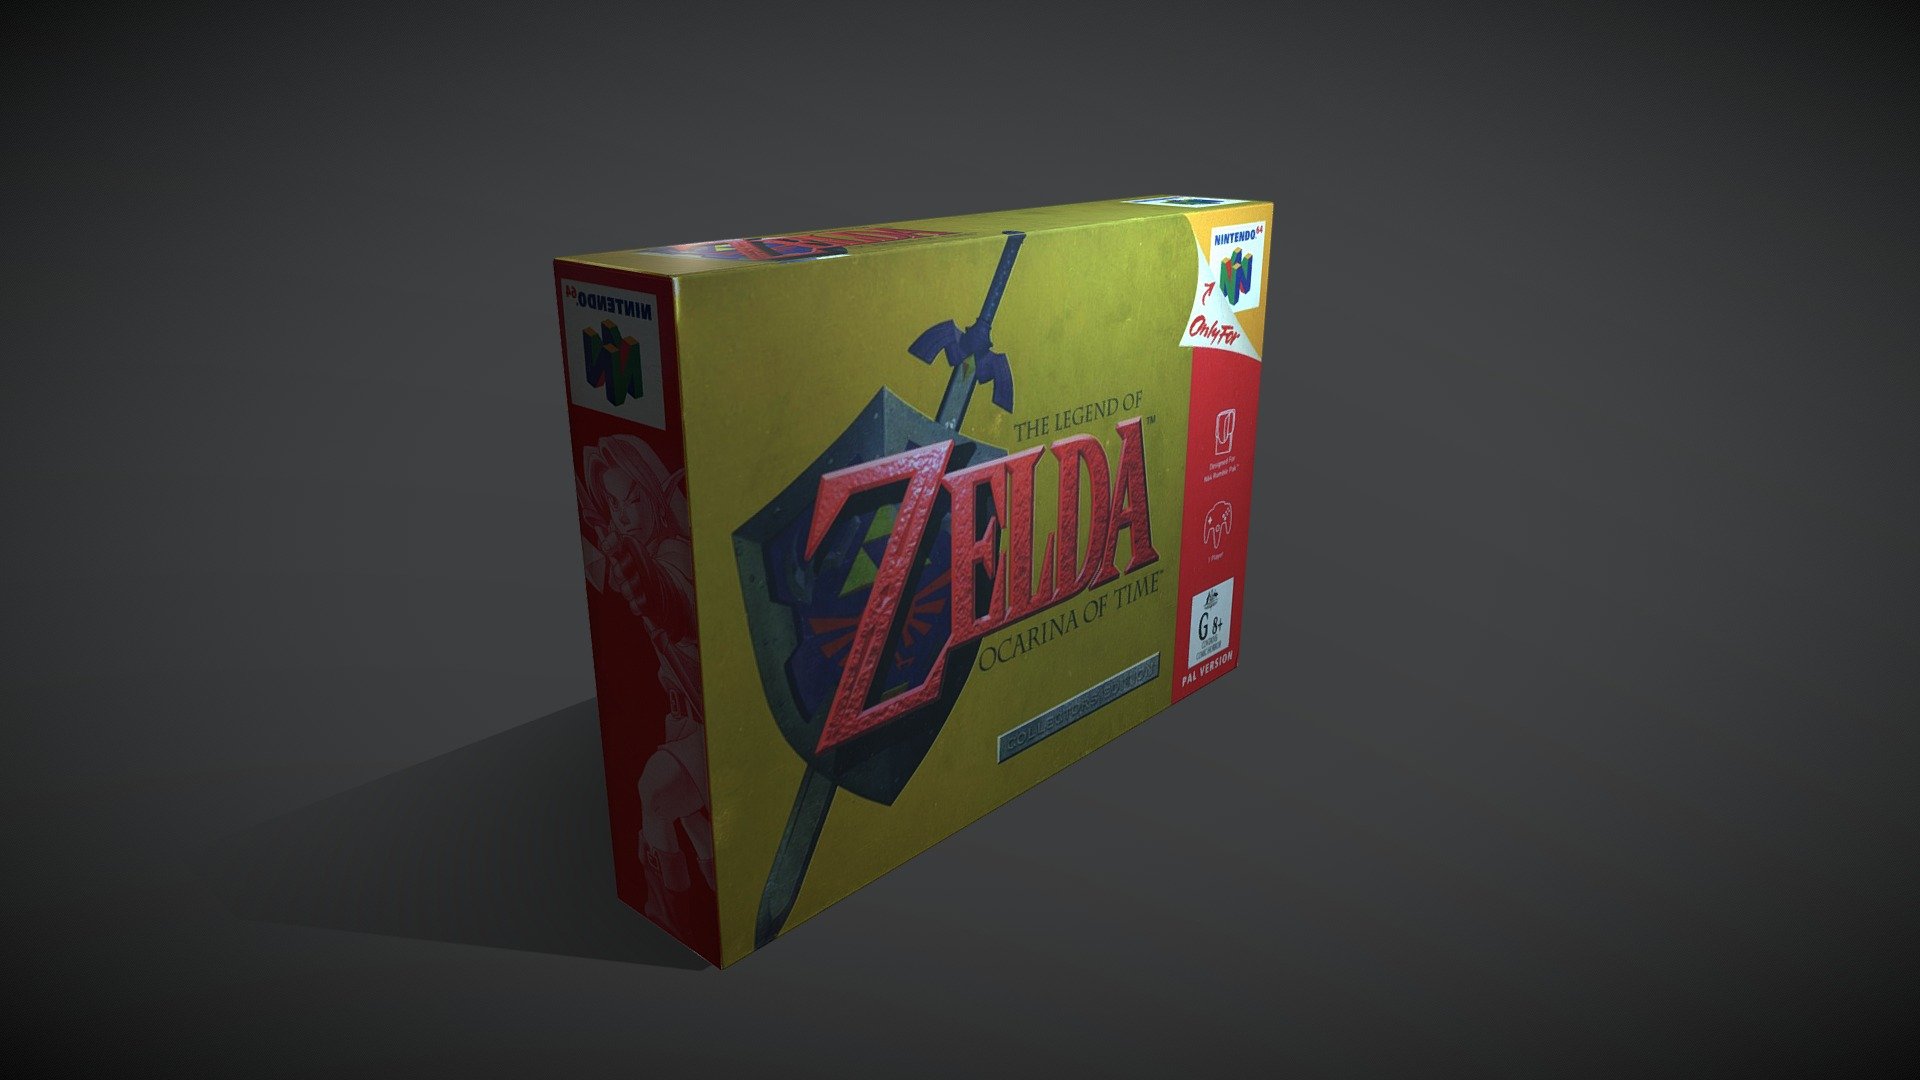 ocarina of time models - Google Search  Legend of zelda, Ocarina of time,  Playable character